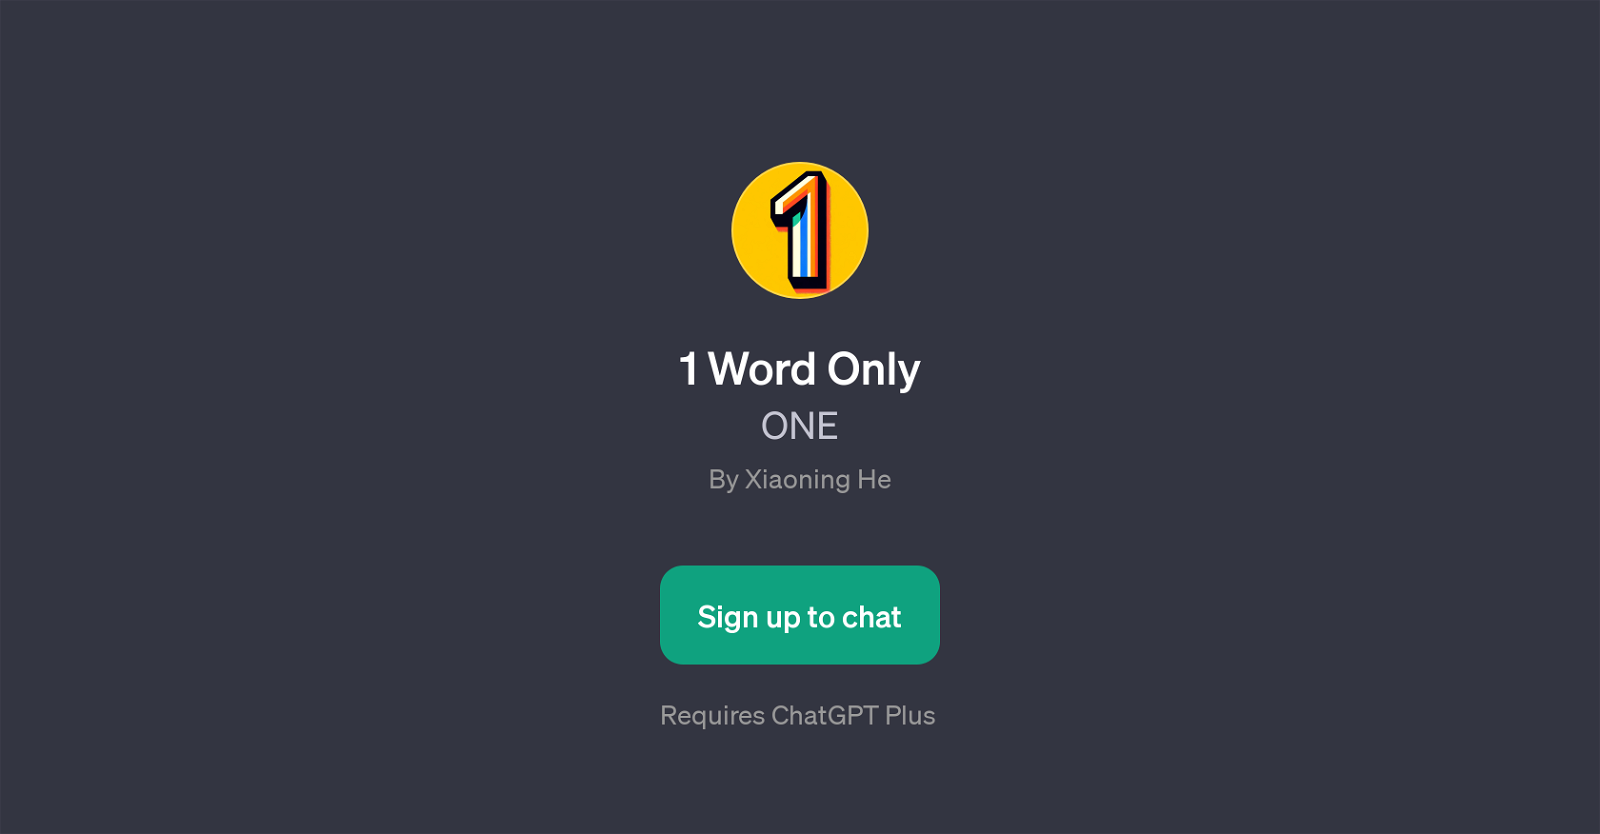 1 Word Only website